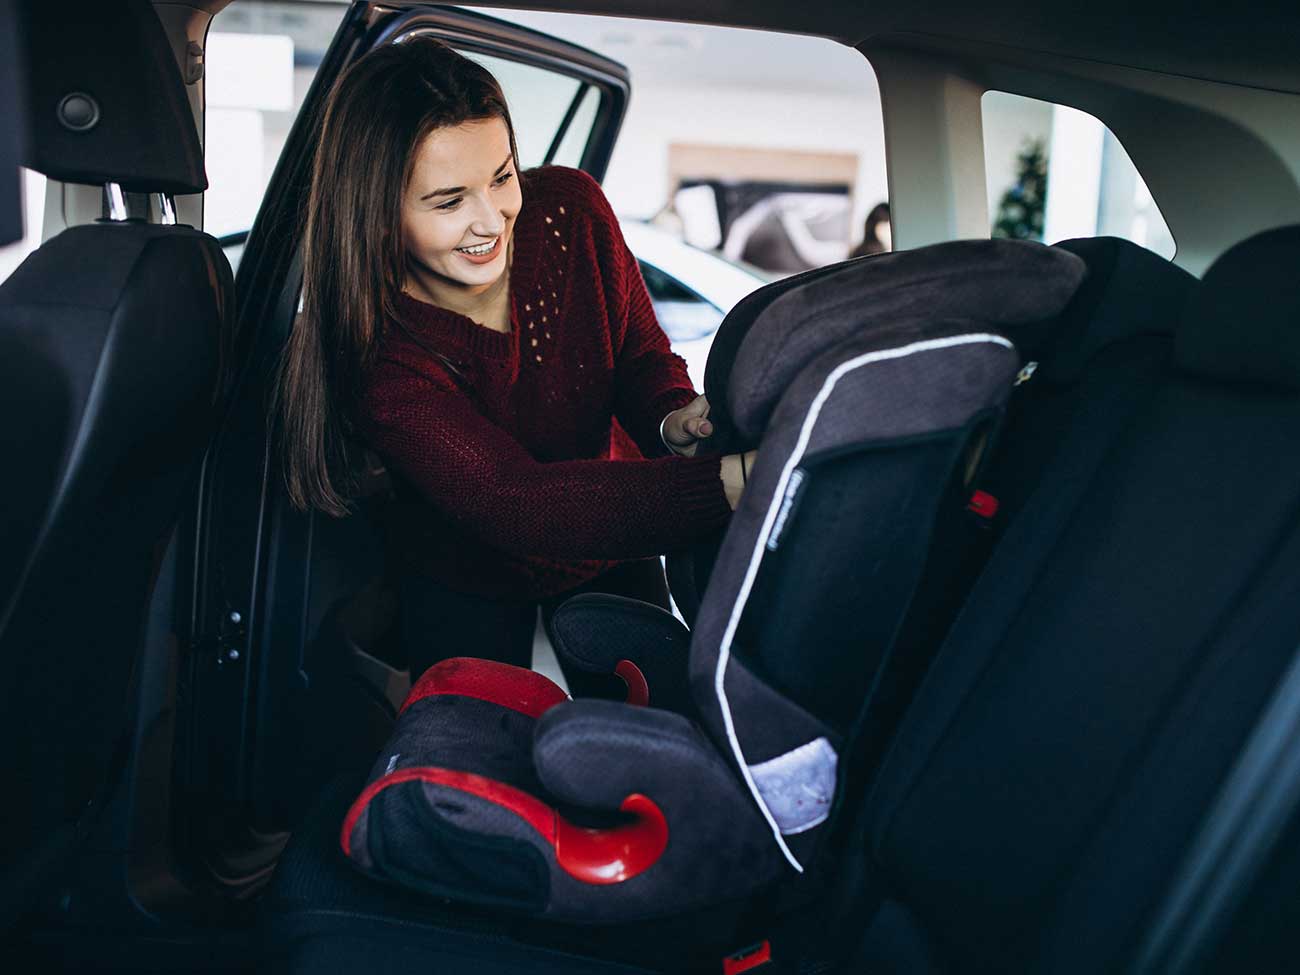 Woman installing a baby seat in car